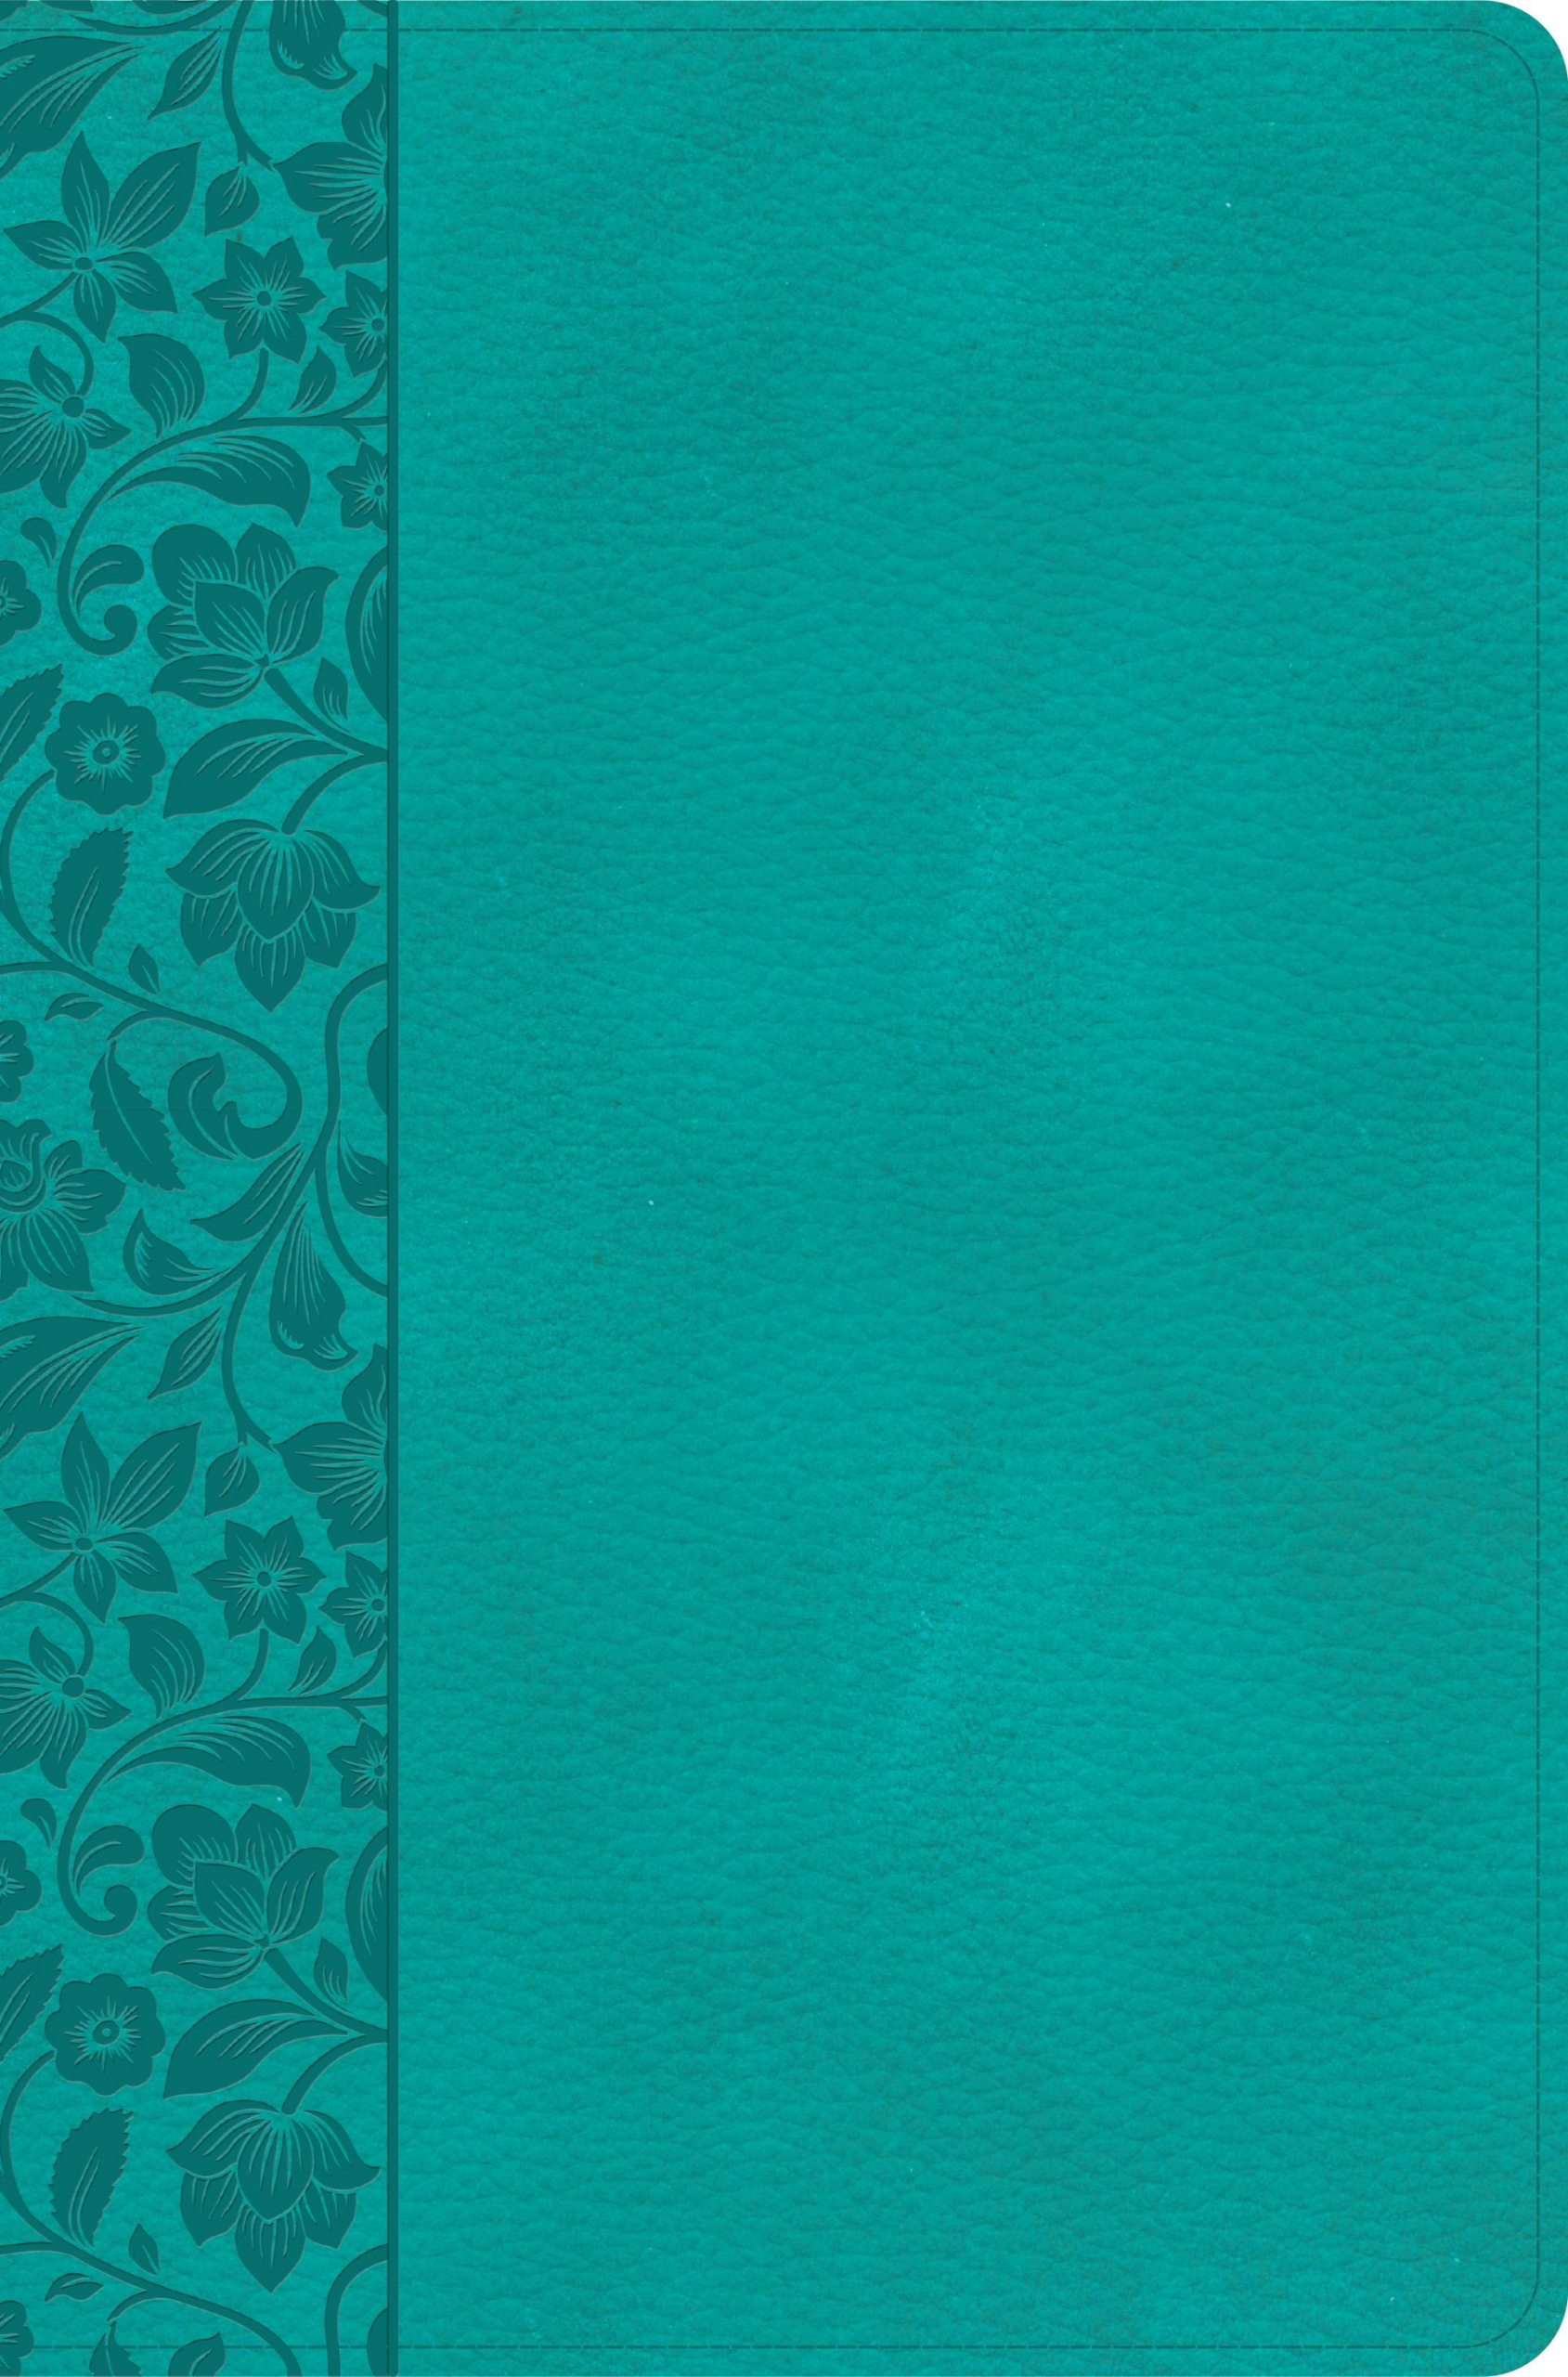 KJV Giant Print Reference Bible, Teal LeatherTouch, Indexed